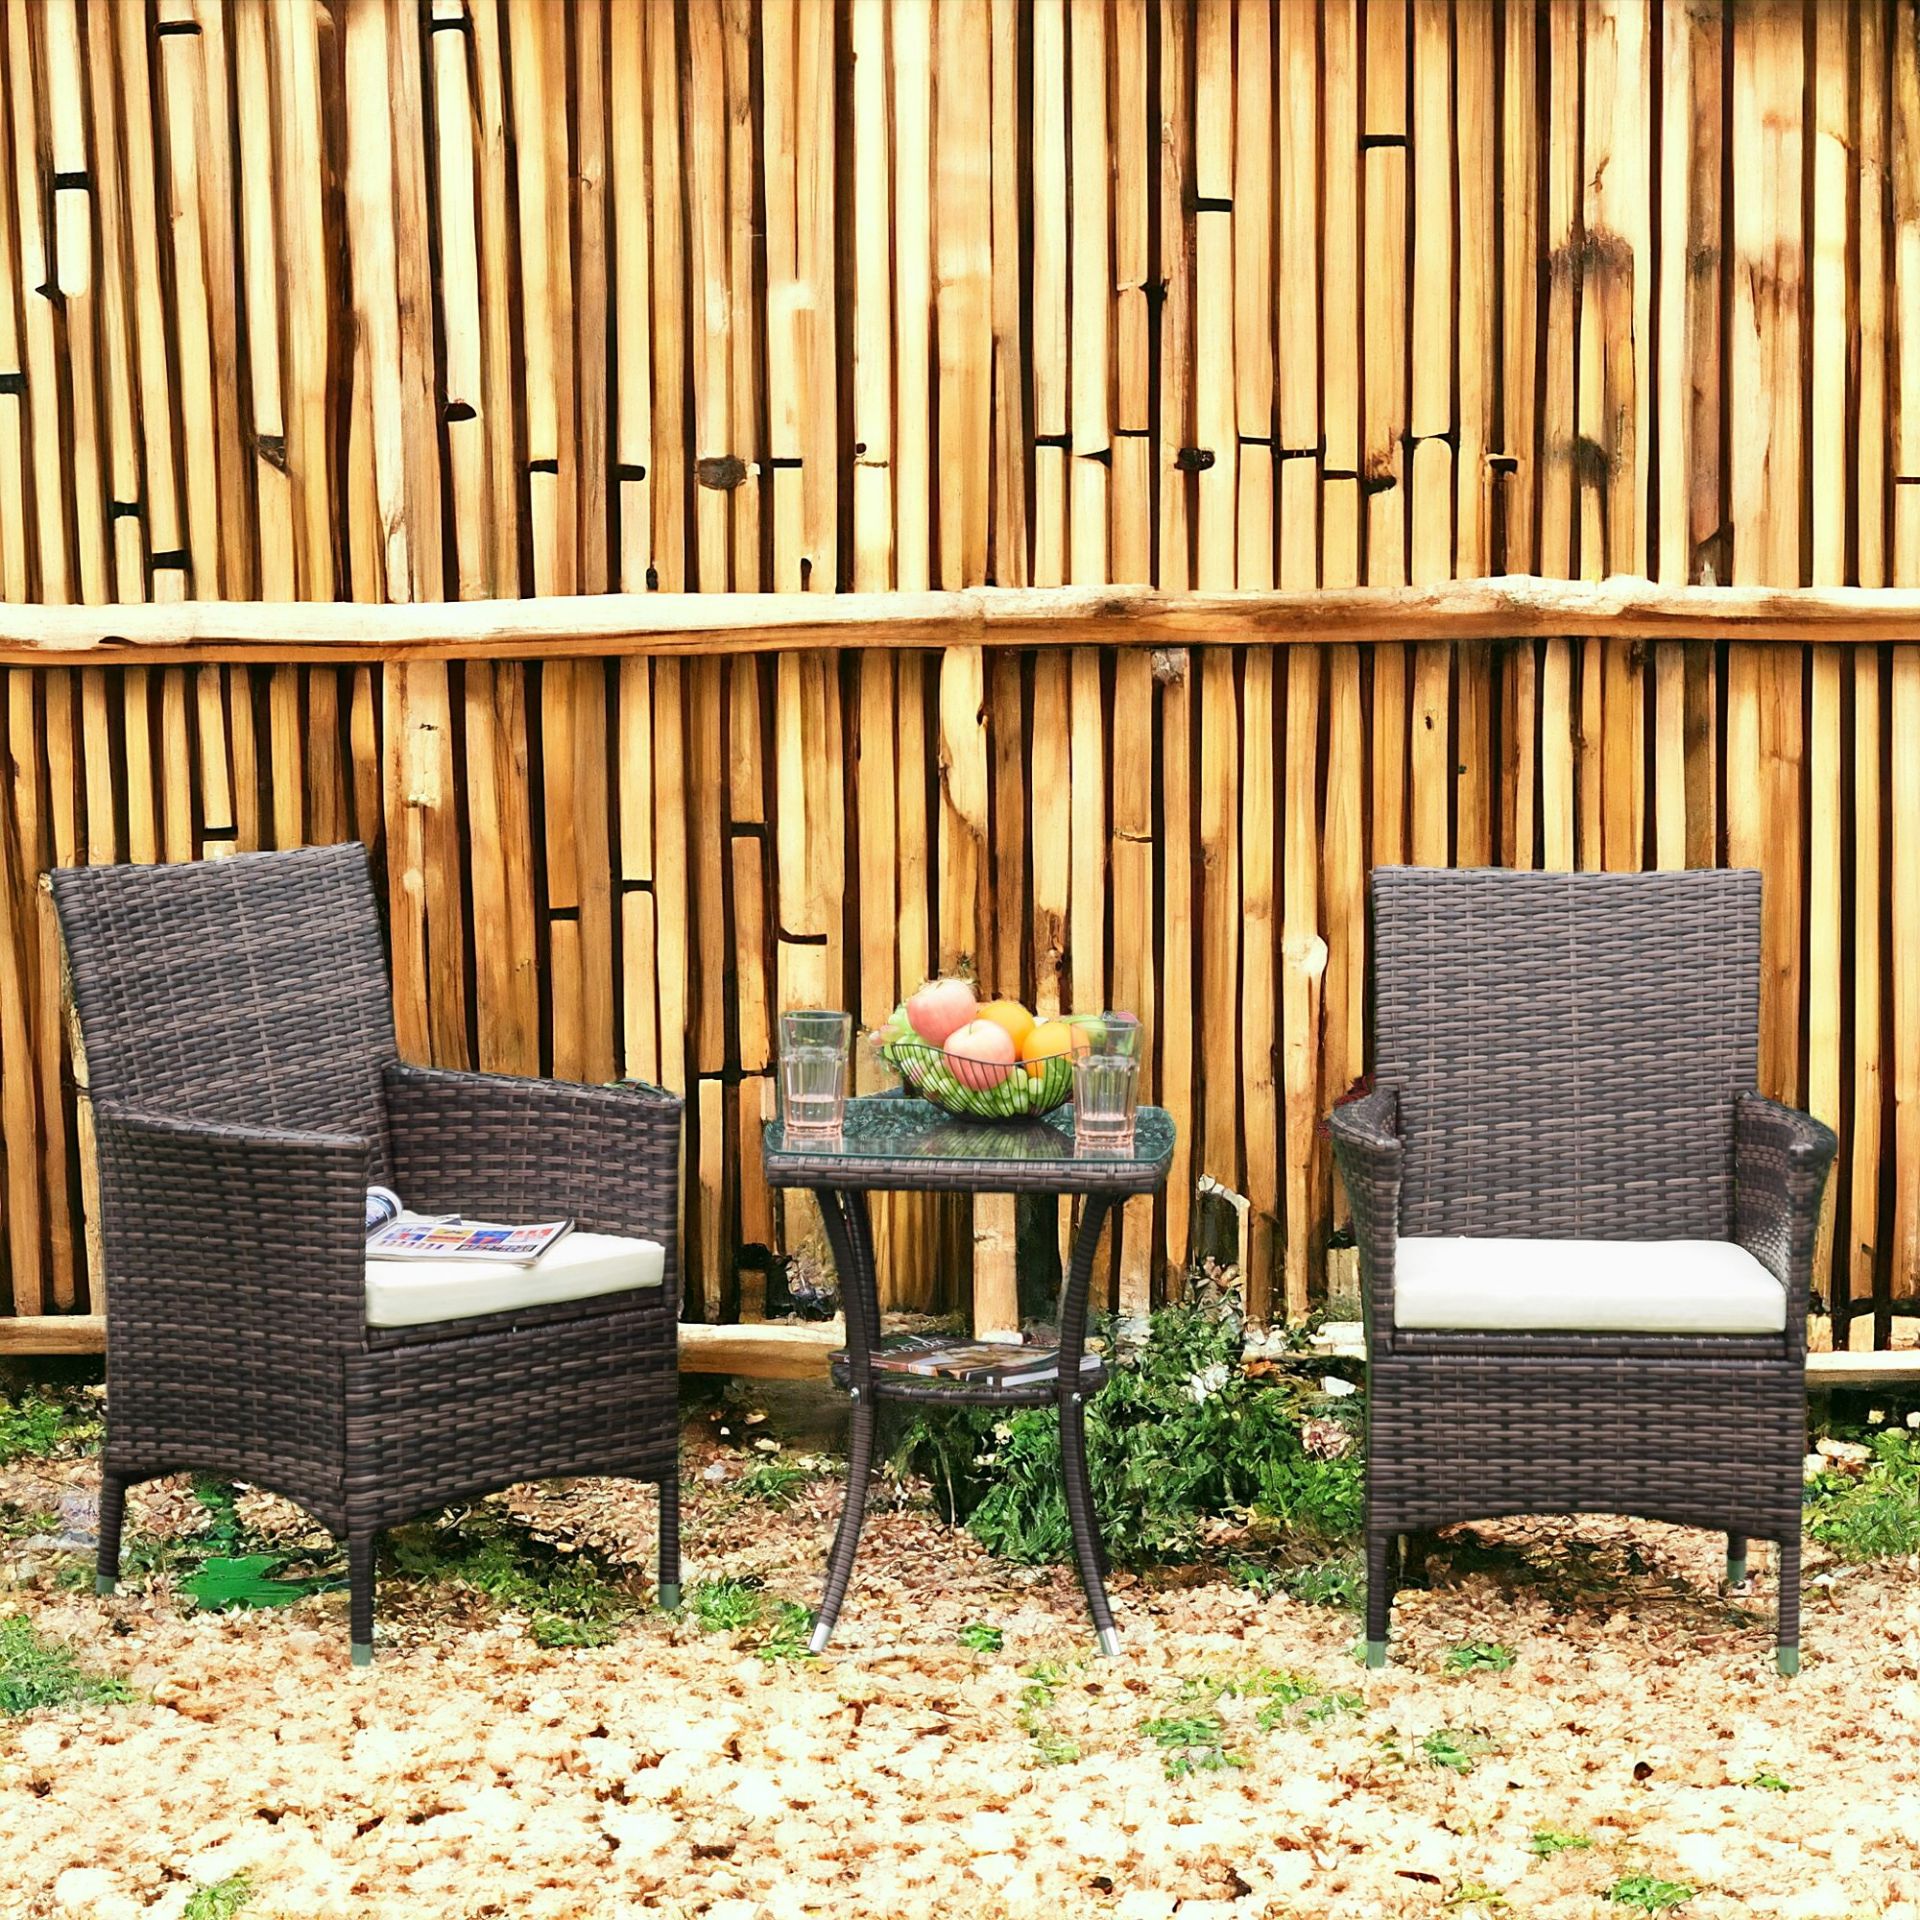 FREE DELIVERY - BRAND NEW RATTAN BISTRO SET GARDEN CHAIR TABLE PATIO OUTDOOR CUSHION